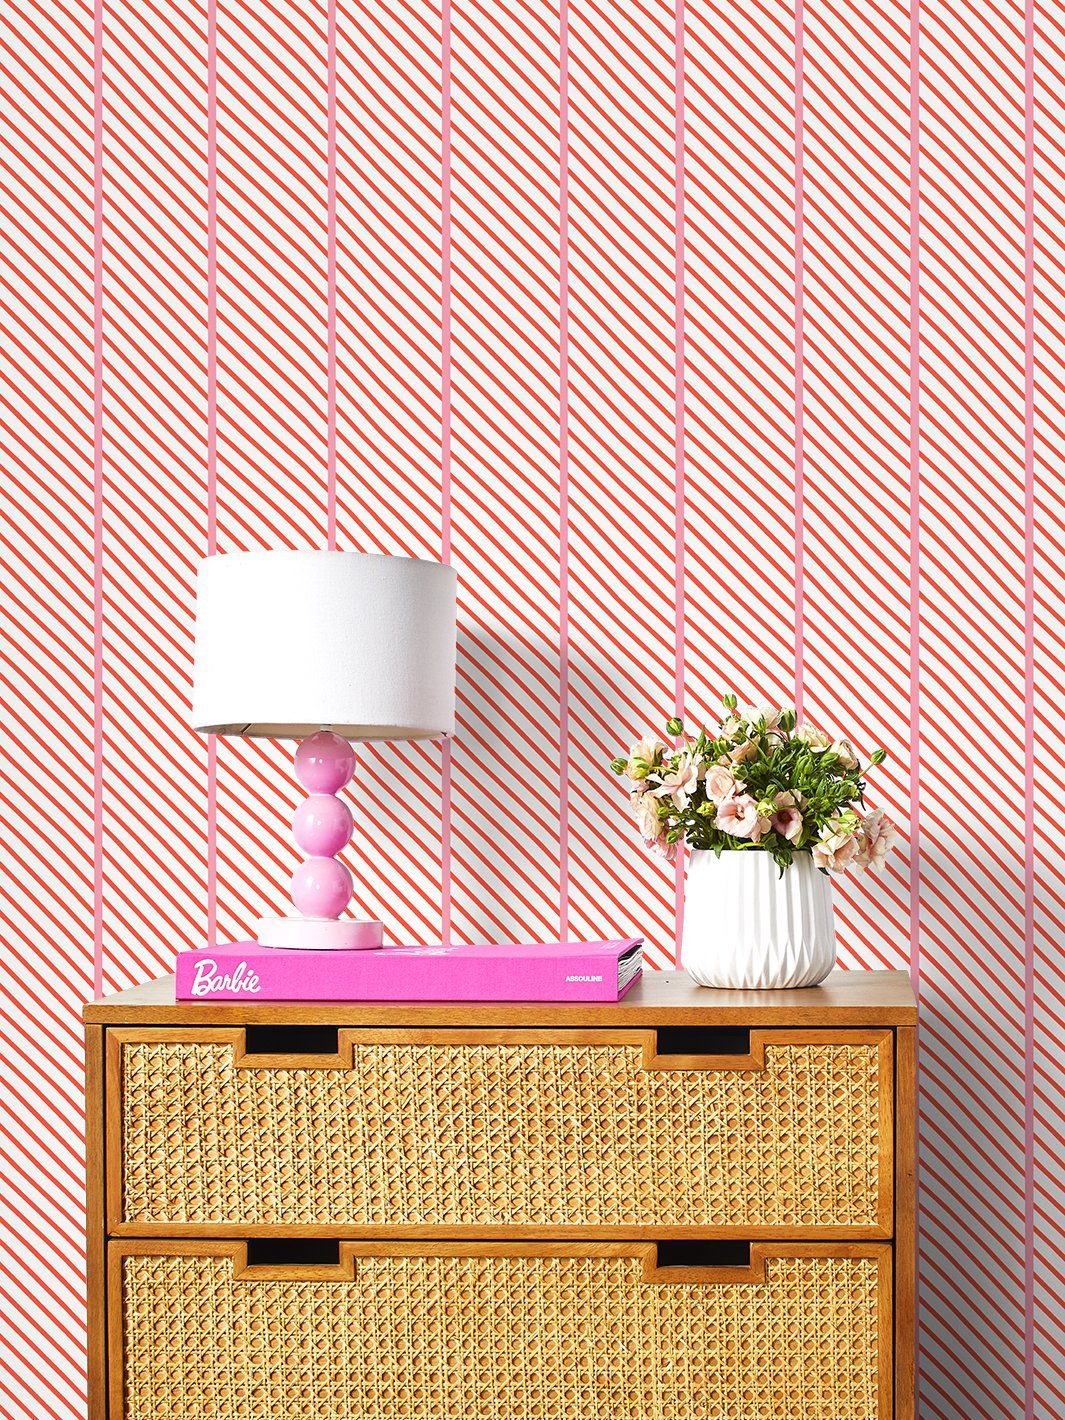 'Barbie™ Dreamhouse Stripes' Wallpaper by Barbie™ - Persimmon Pink